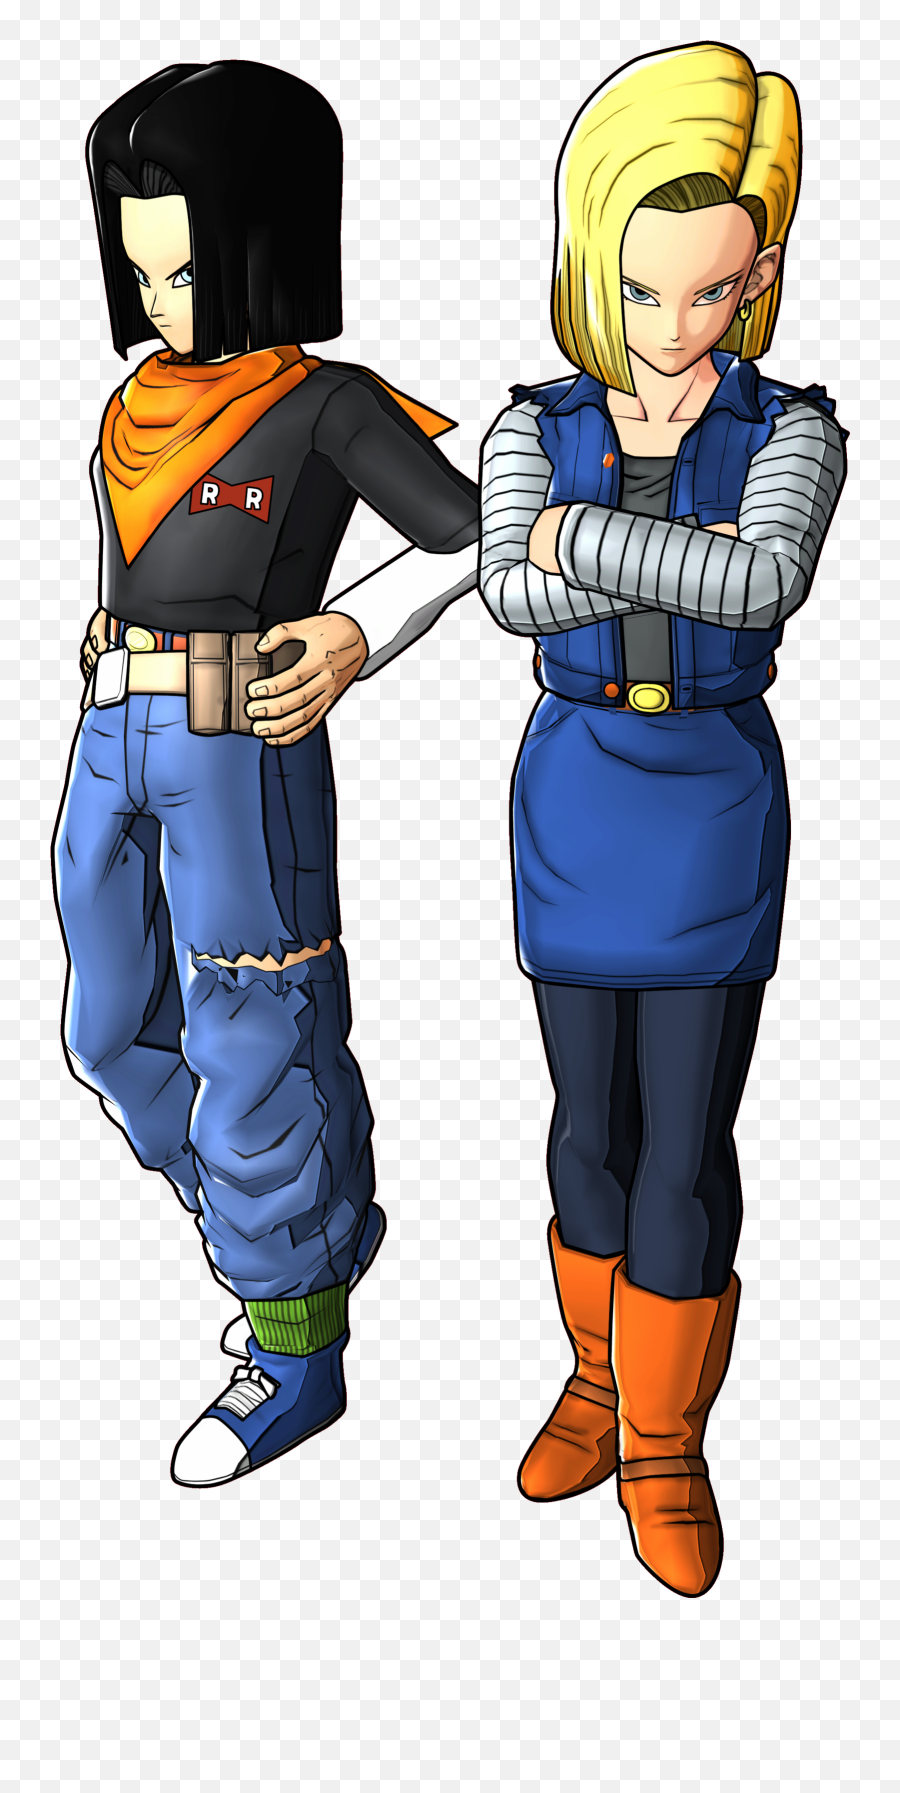 Android 17 - Android 17 Dragon Ball Z Battle Emoji,Android 17 Human Emotions